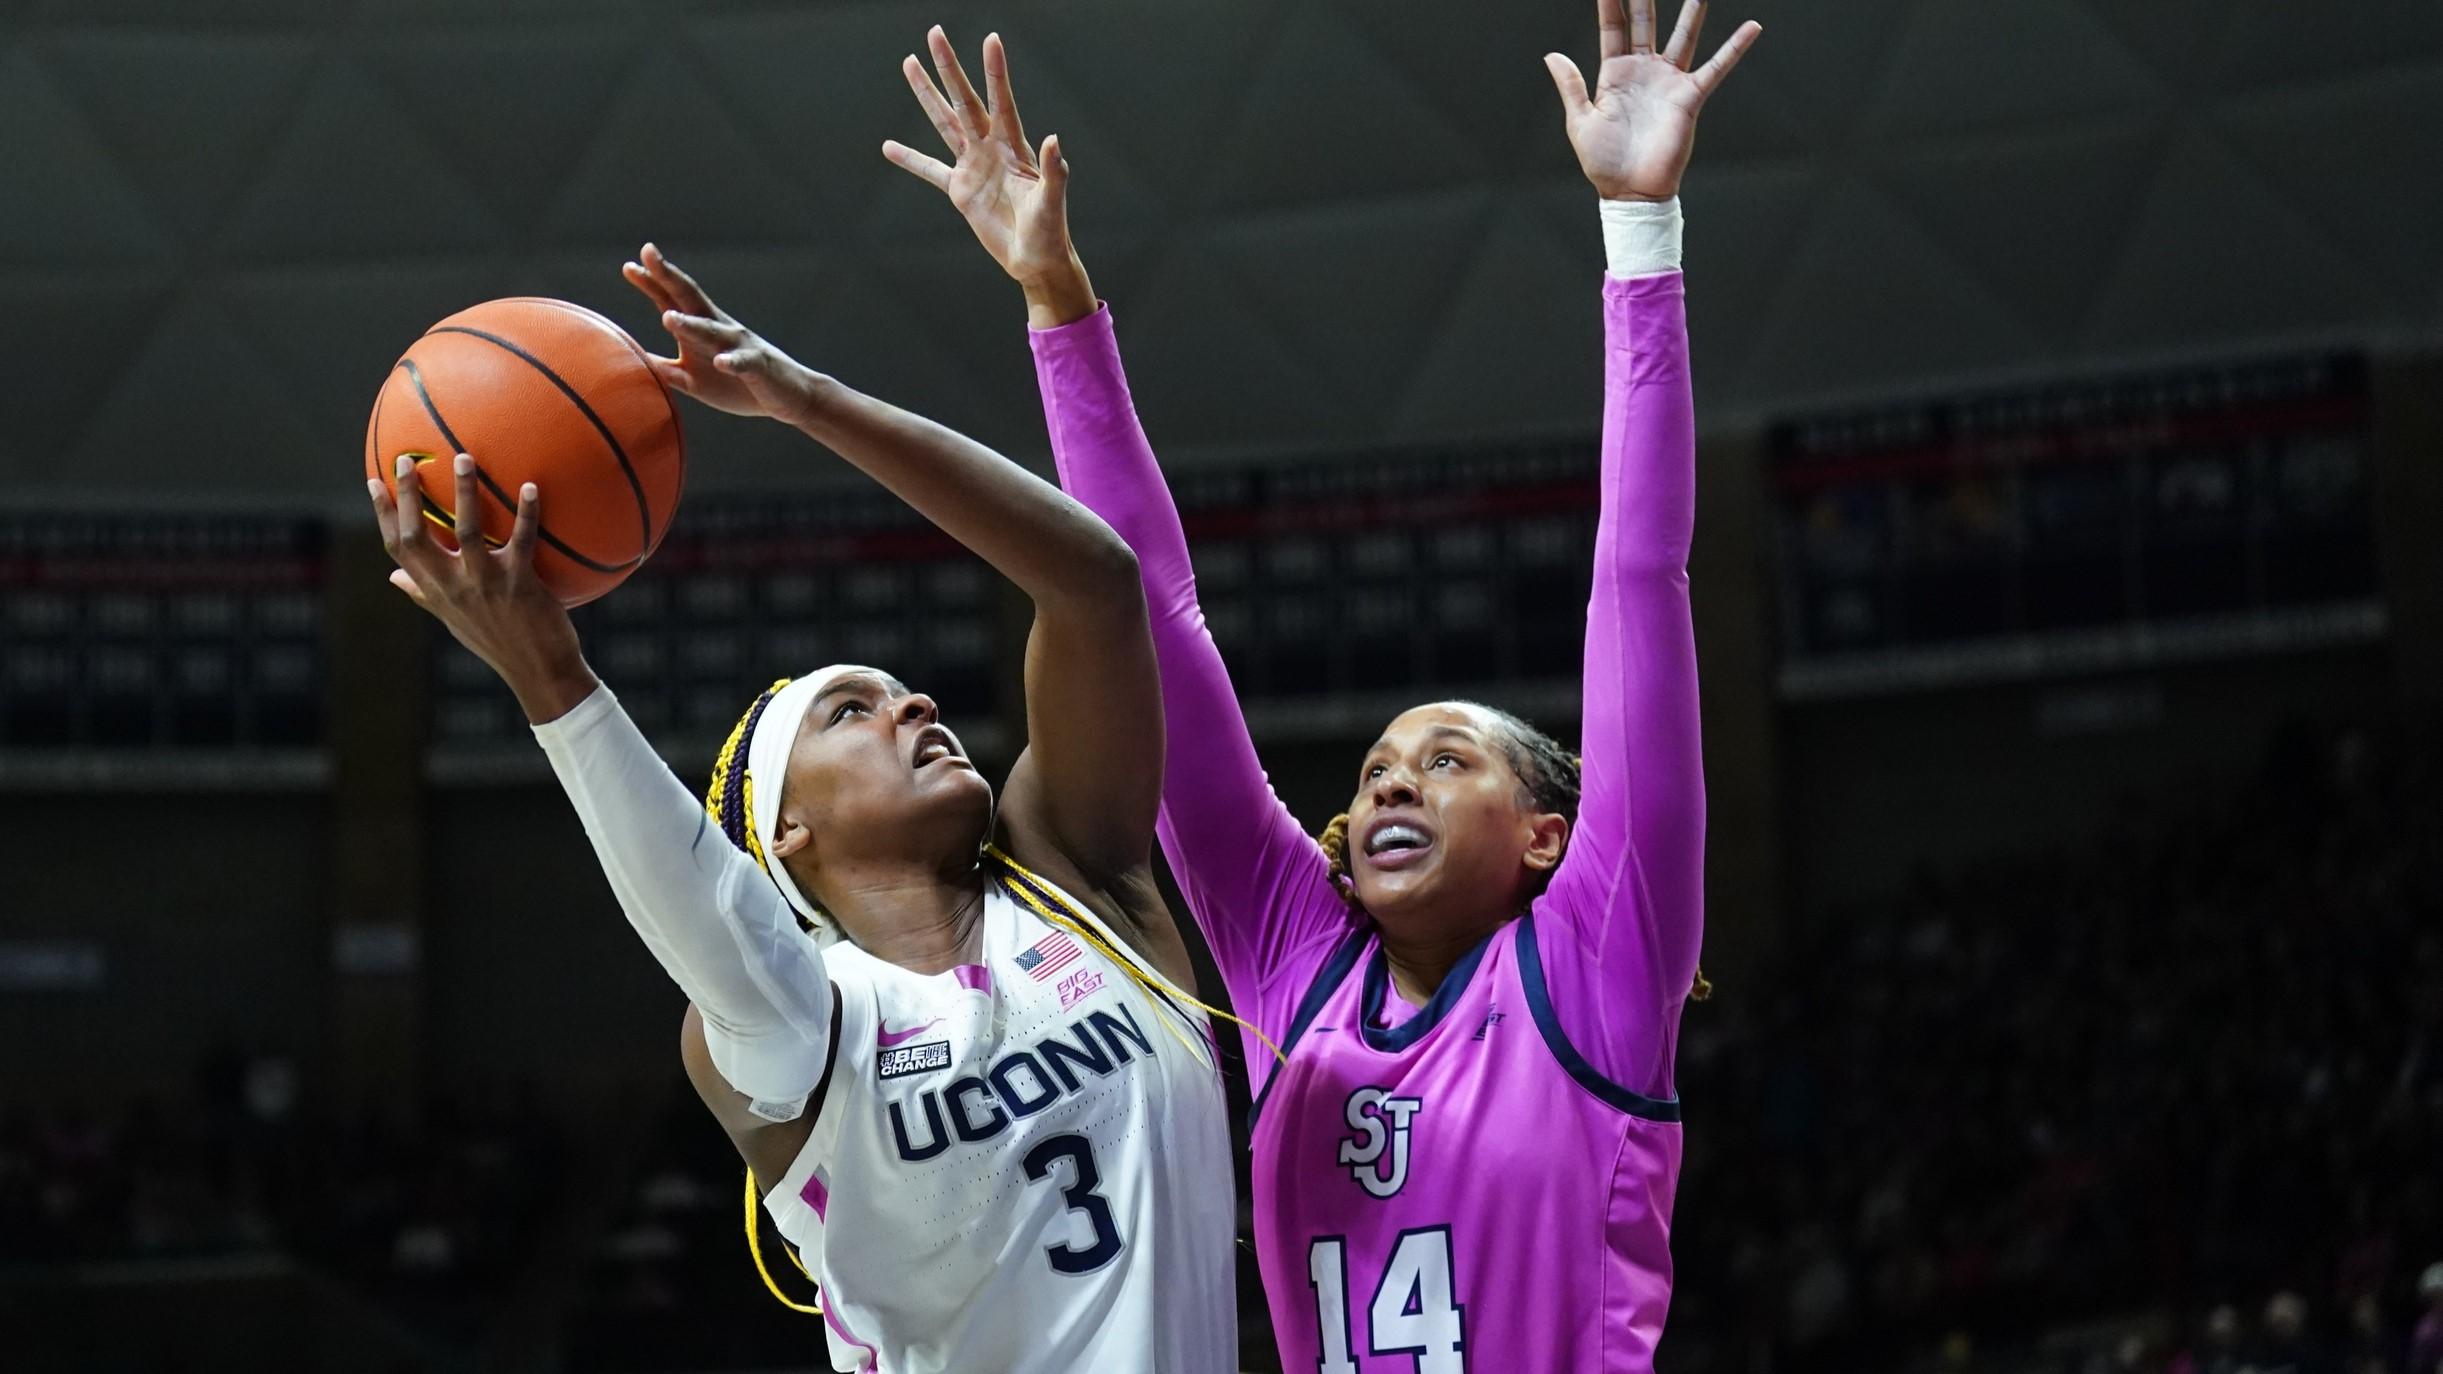 Feb 4, 2024; Storrs, Connecticut, USA; UConn Huskies forward Aaliyah Edwards (3) shoots against St. John's Red Storm forward Jillian Archer (14) in the first half at Harry A. Gampel Pavilion. / David Butler II-USA TODAY Sports